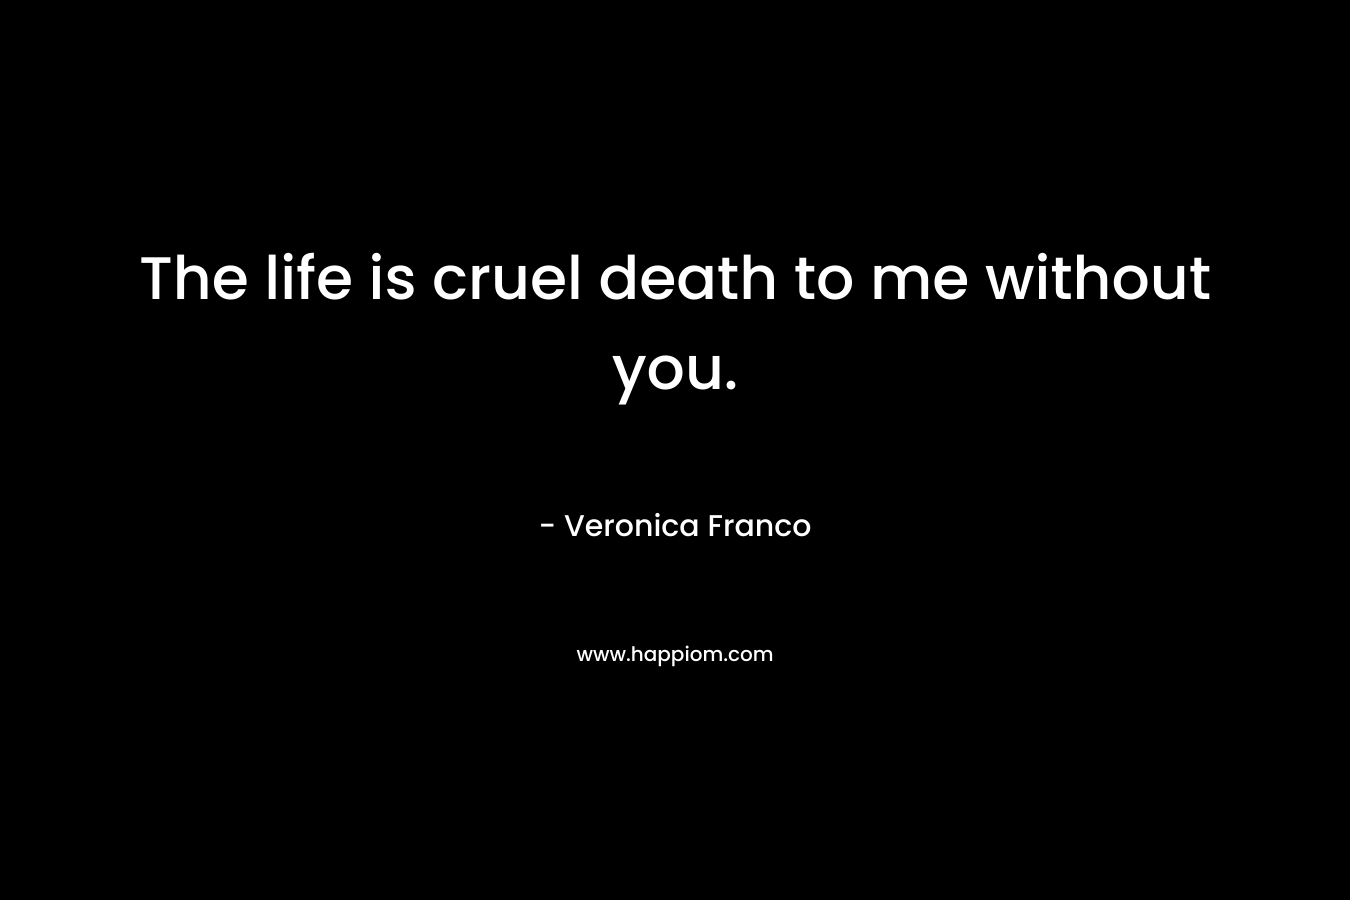 The life is cruel death to me without you.